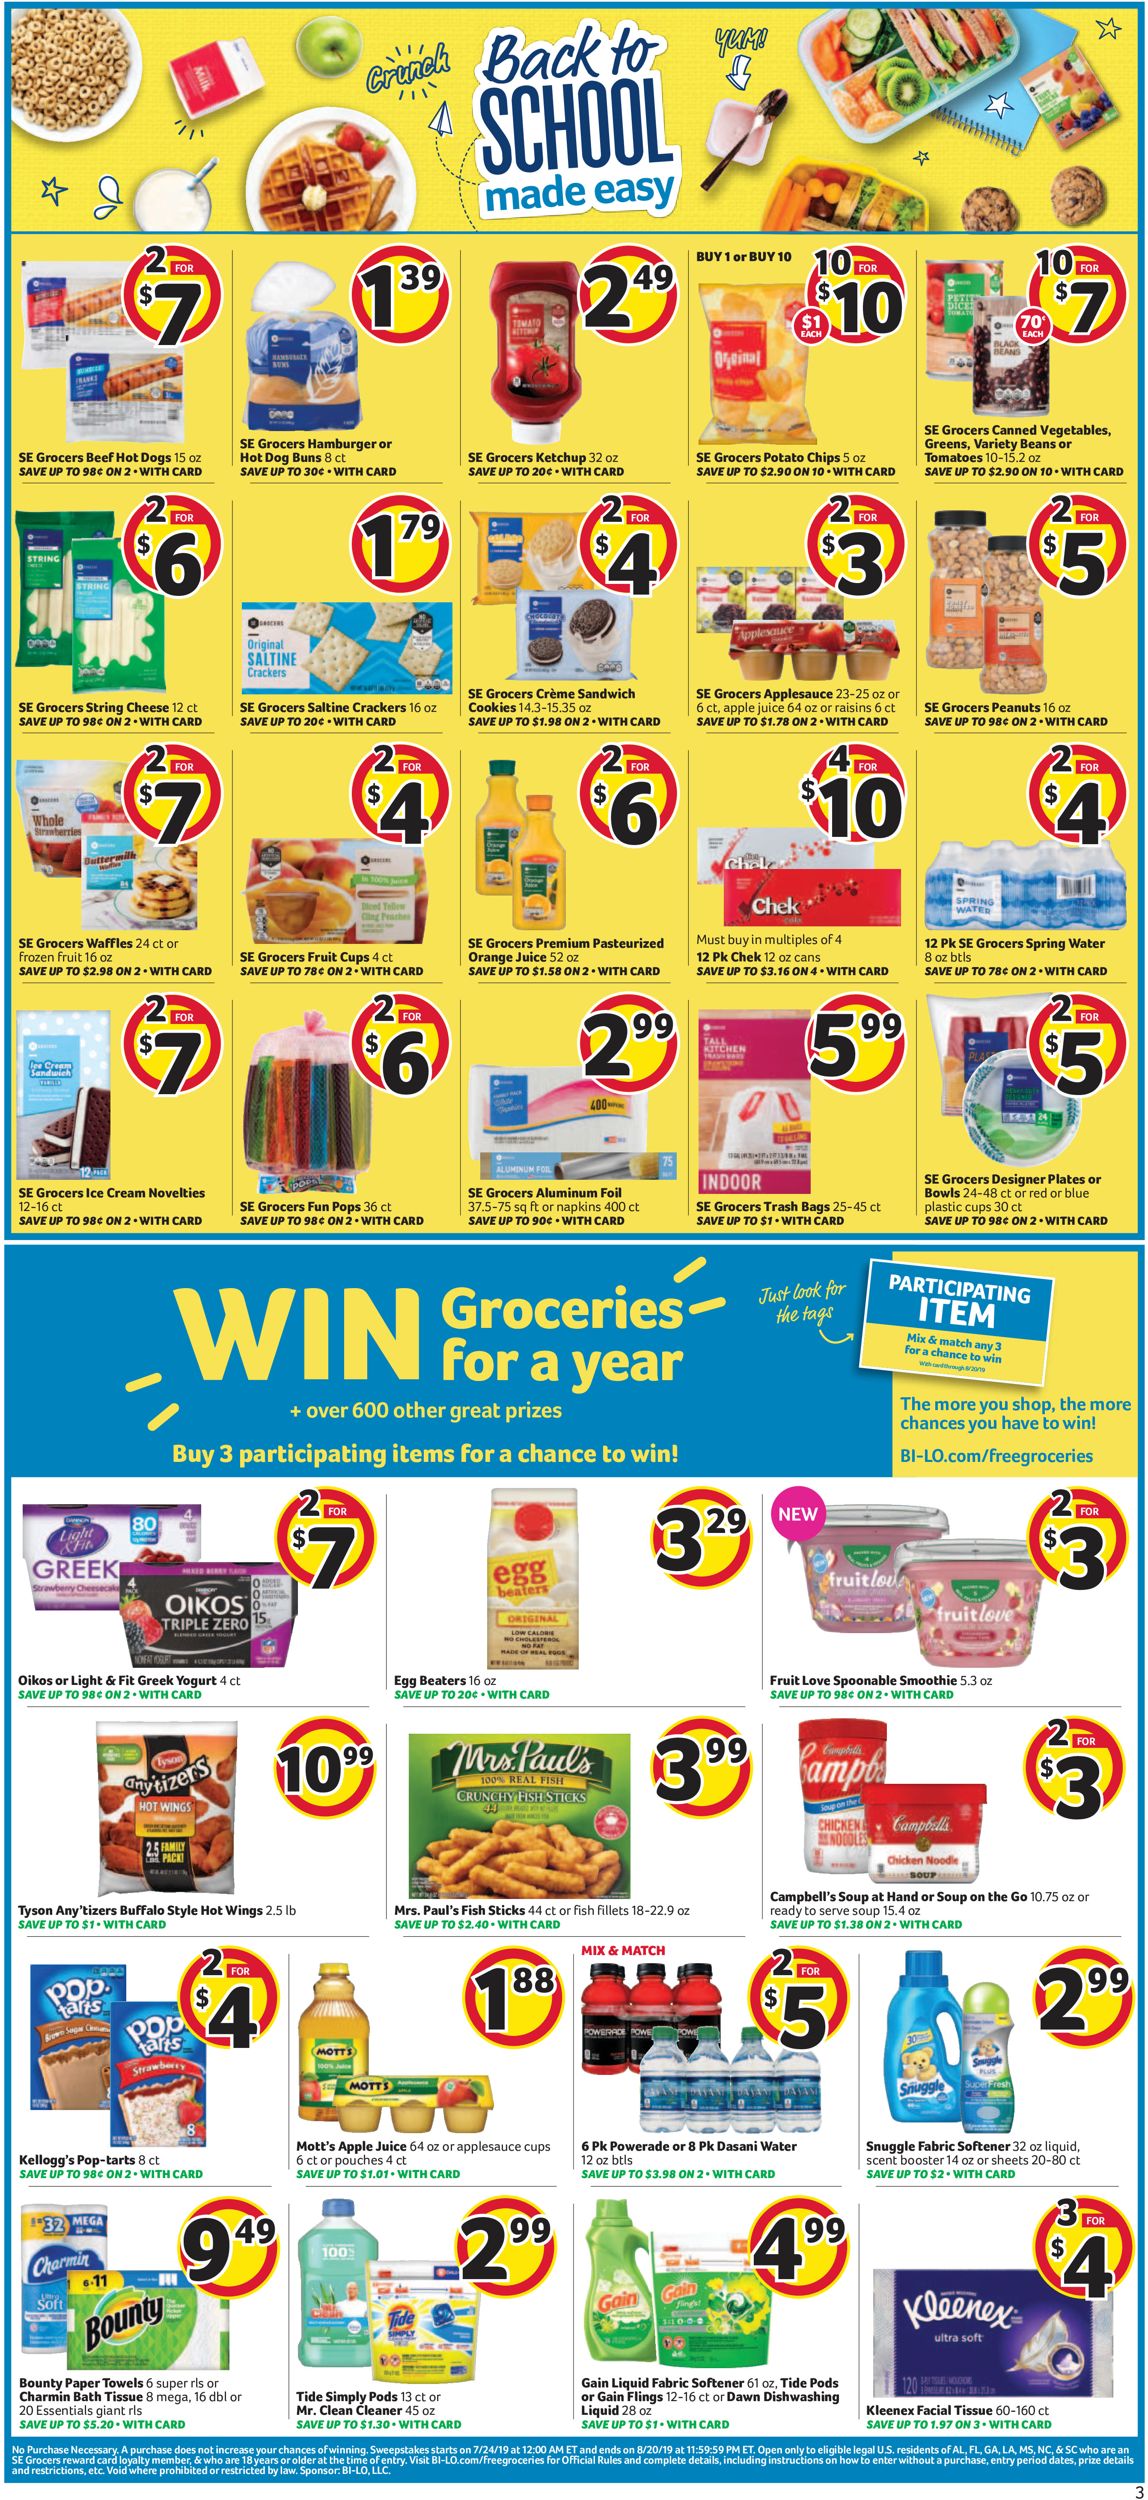 Catalogue BI-LO from 07/24/2019